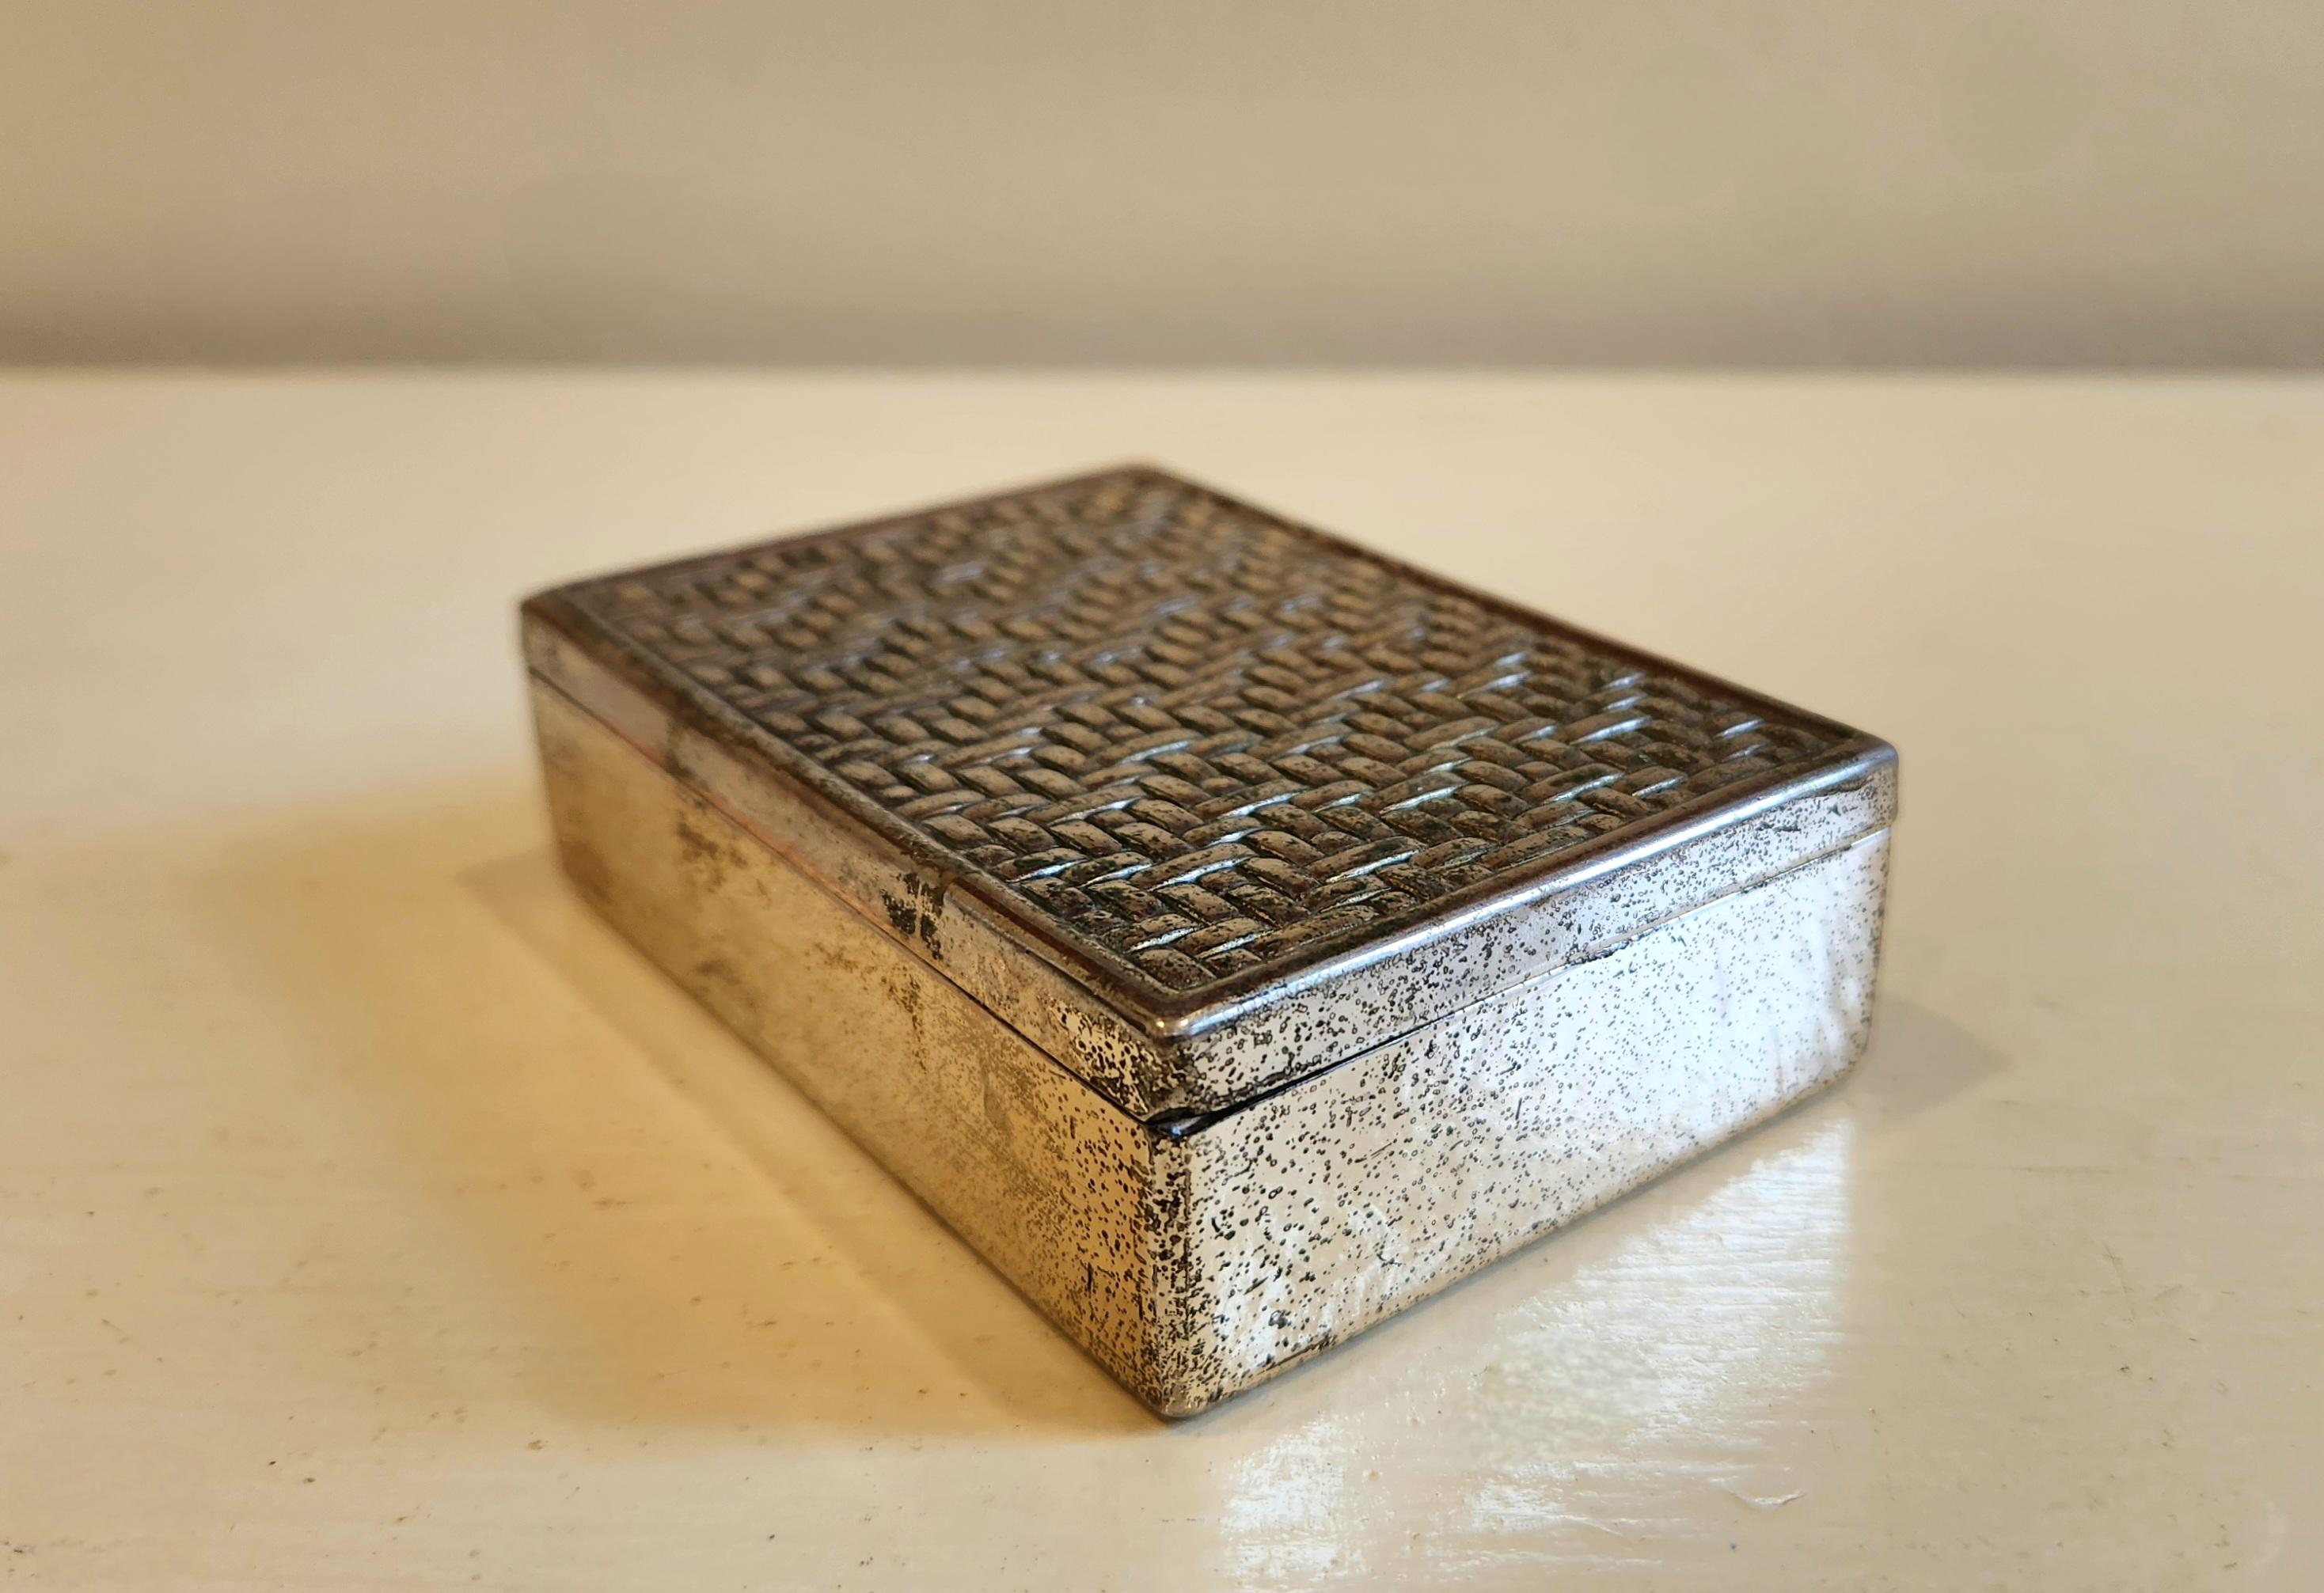 This box has a very nice silver patina even though it is not marked as silver. On the top of the box is an elegant design of intricate lattice work. It would look beautiful as decoration on a desk or table to collect small items. This box also has a